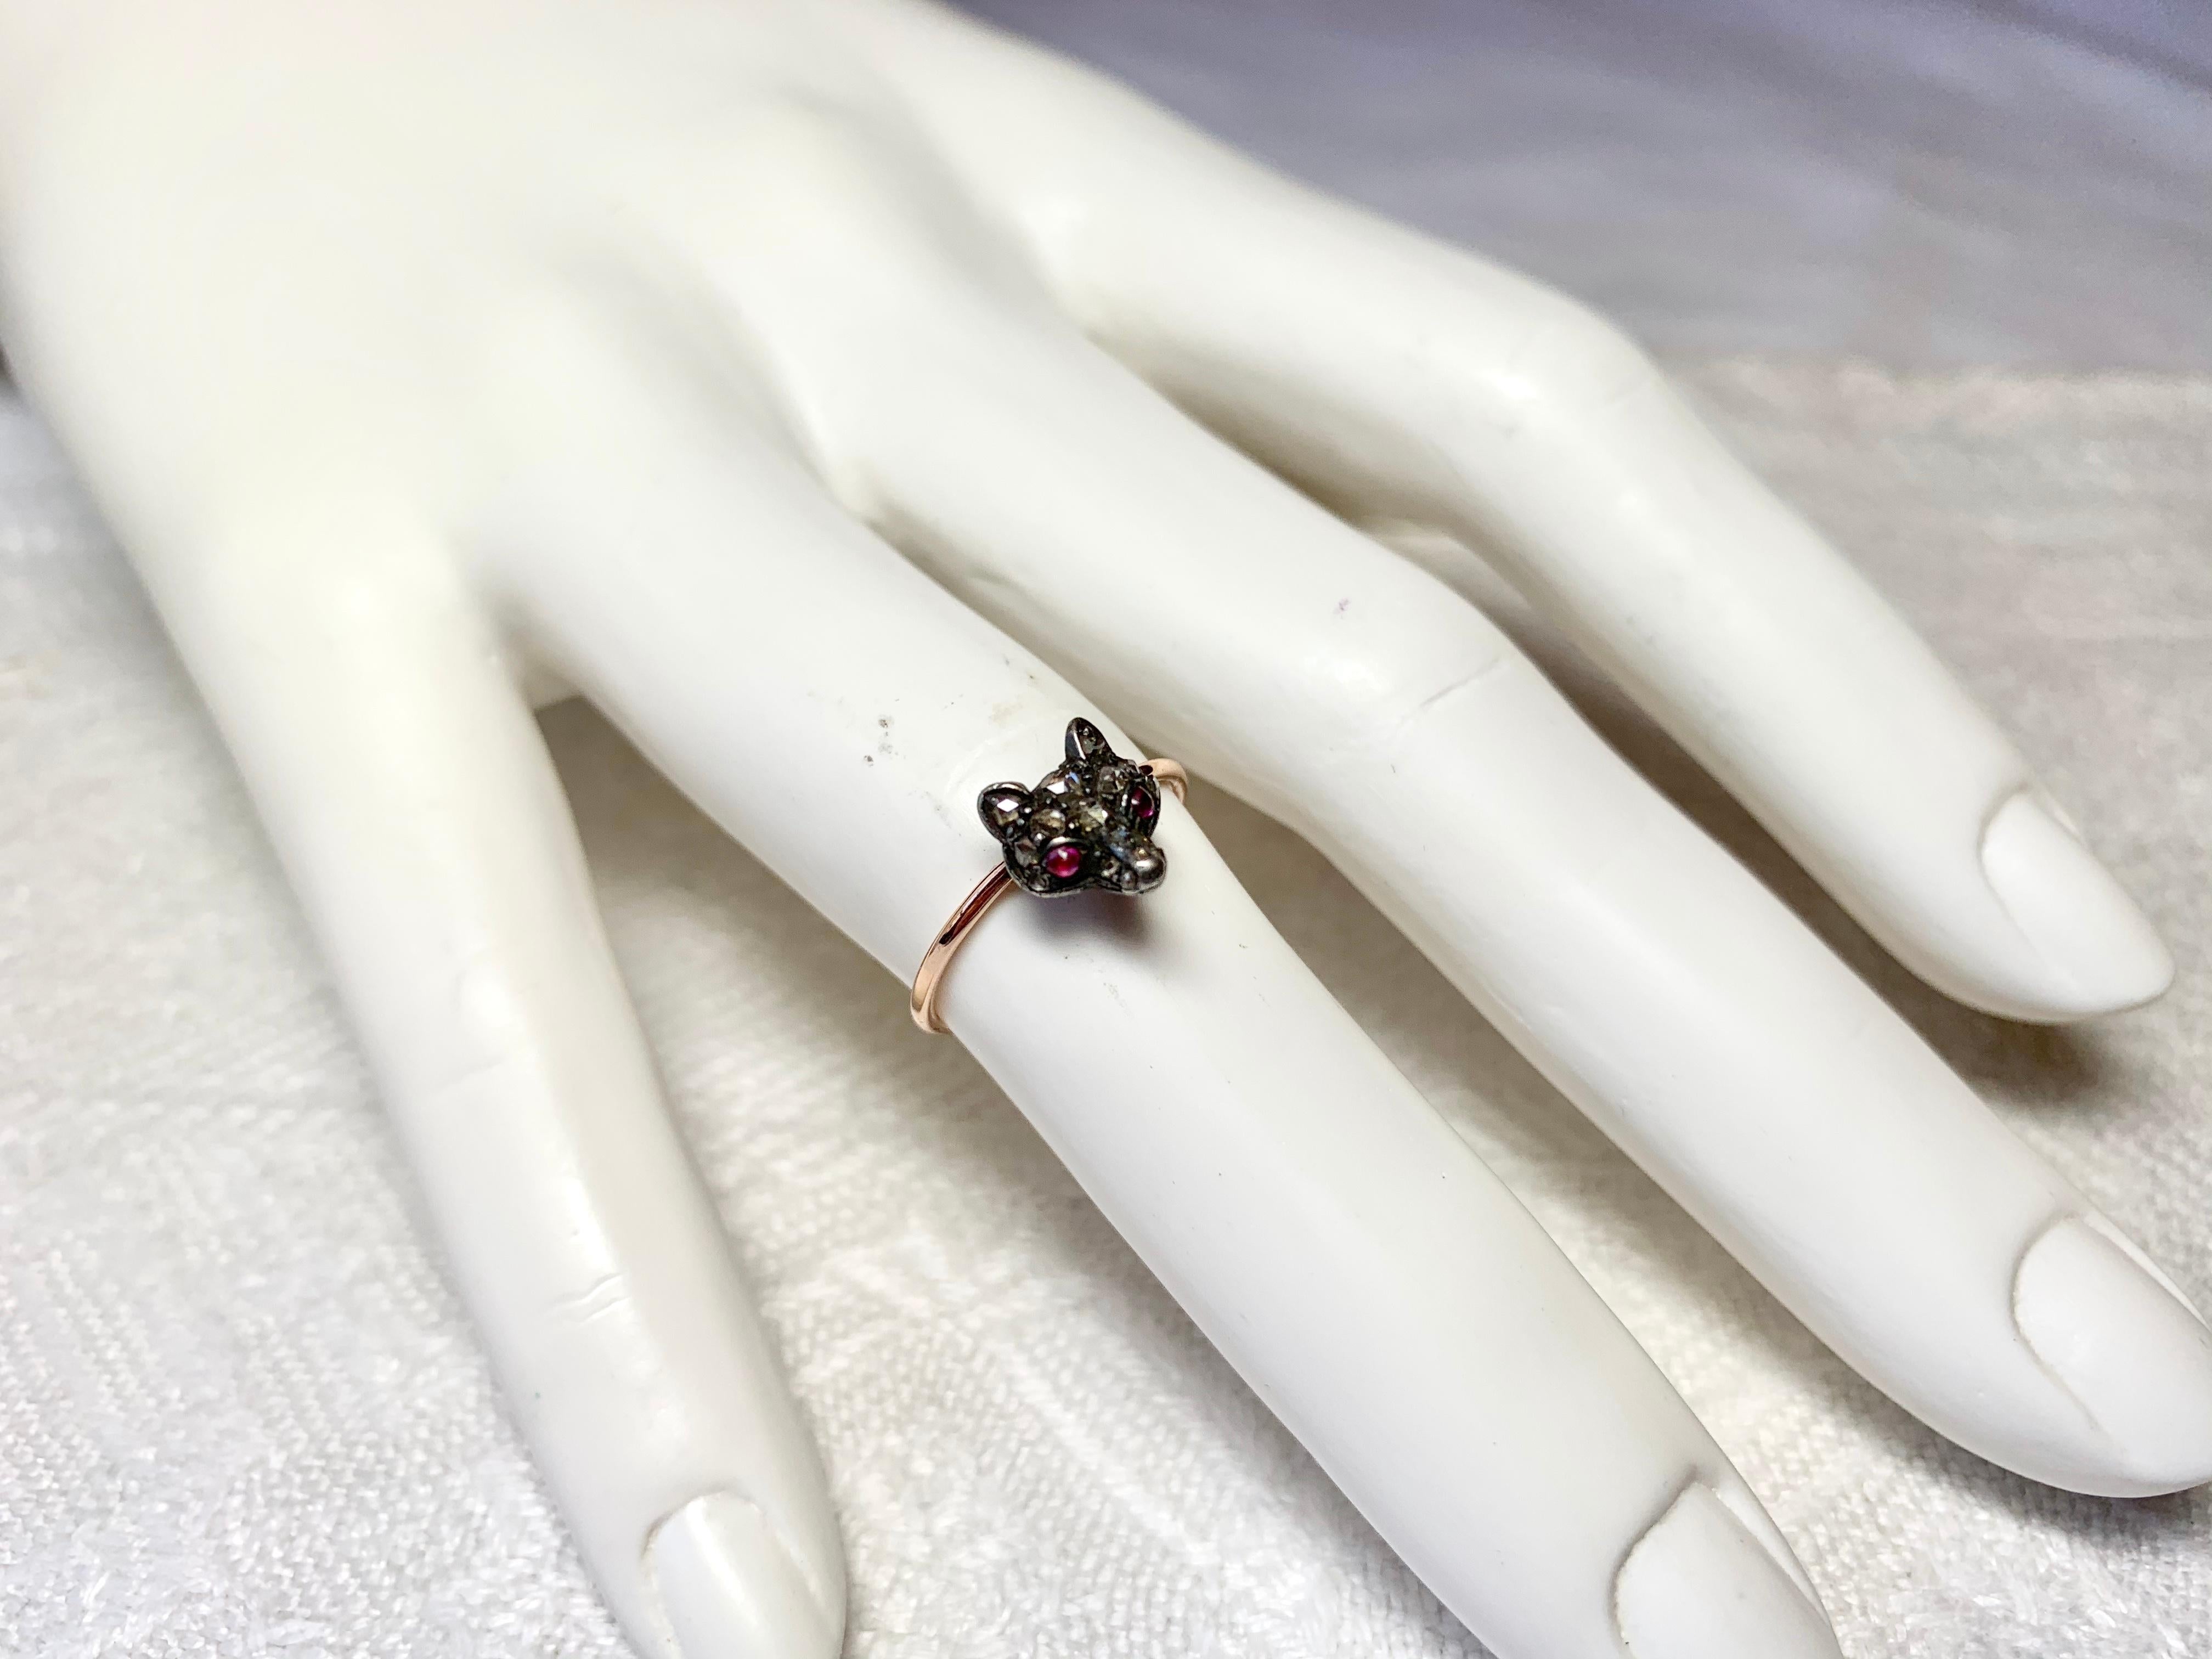 This is an Antique Victorian - Edwardian Ring with a gorgeous Fox head set with Rose Cut Diamonds with Ruby eyes.  The jewels are set in Silver atop Gold as was the custom of the period.  This is a very rare and wonderful antique animal fox ring. 